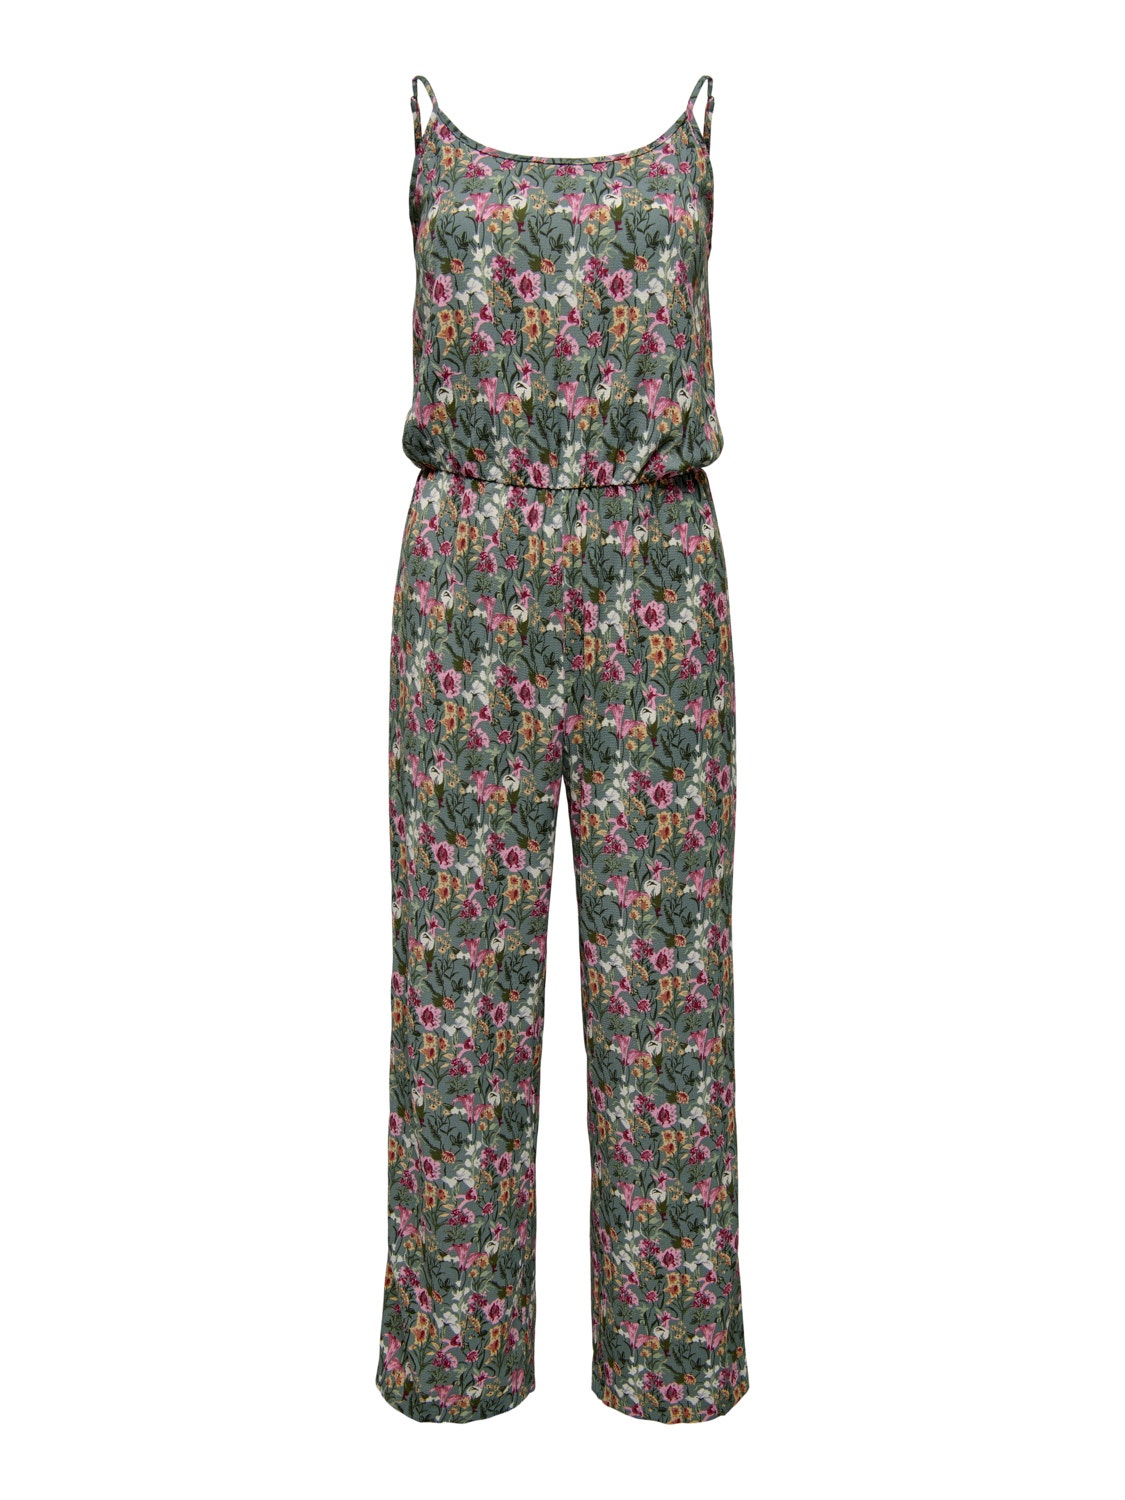 ONLY Smala axelband Jumpsuit -Balsam Green - 15300900